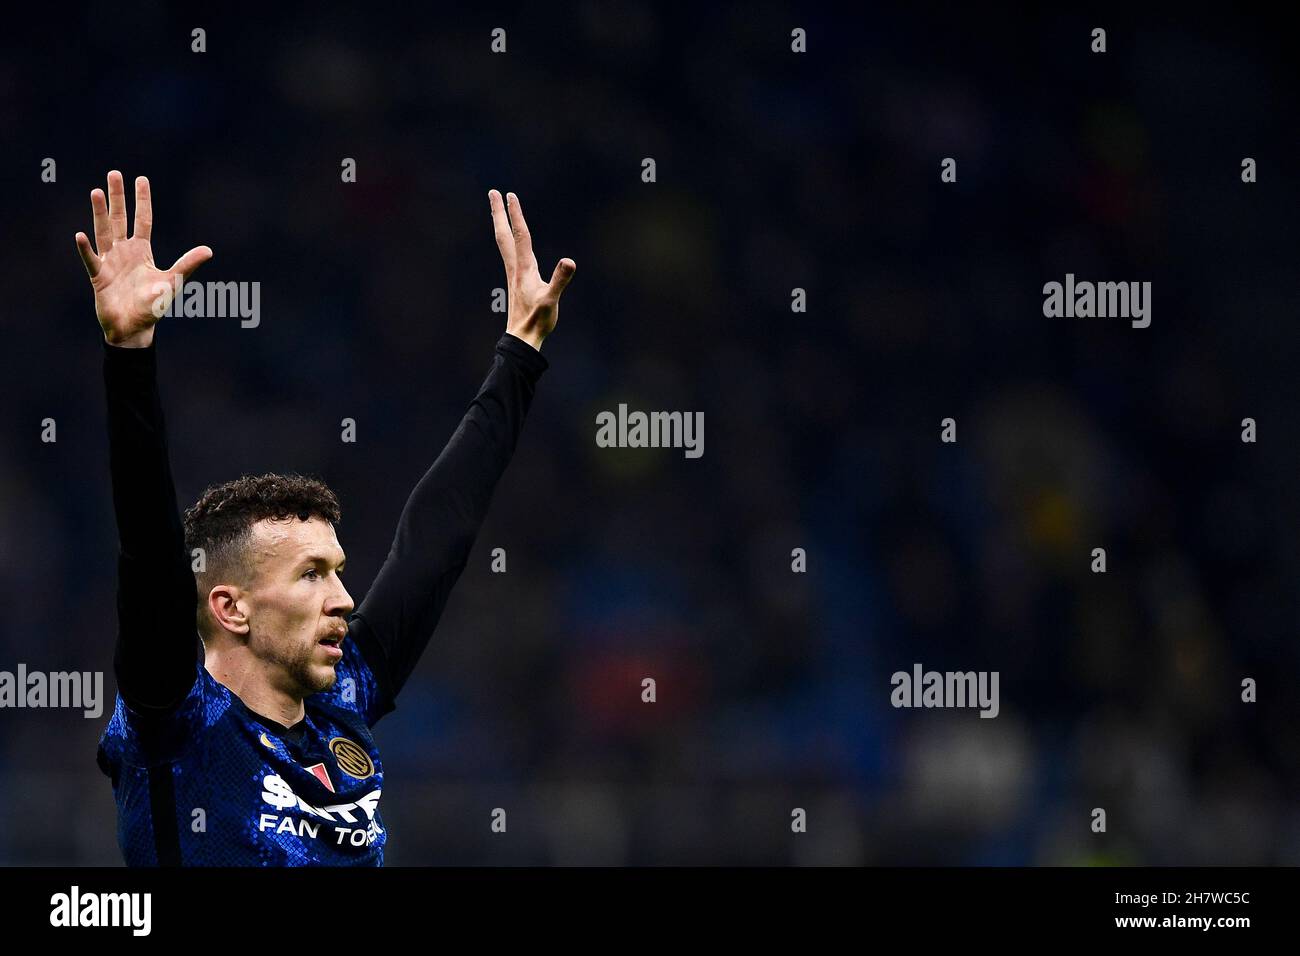 Milan, Italy. 24 November 2021. Ivan Perisic of FC Internazionale gestures during the UEFA Champions League football match between FC Internazionale and FC Shakhtar Donetsk. Credit: Nicolò Campo/Alamy Live News Stock Photo